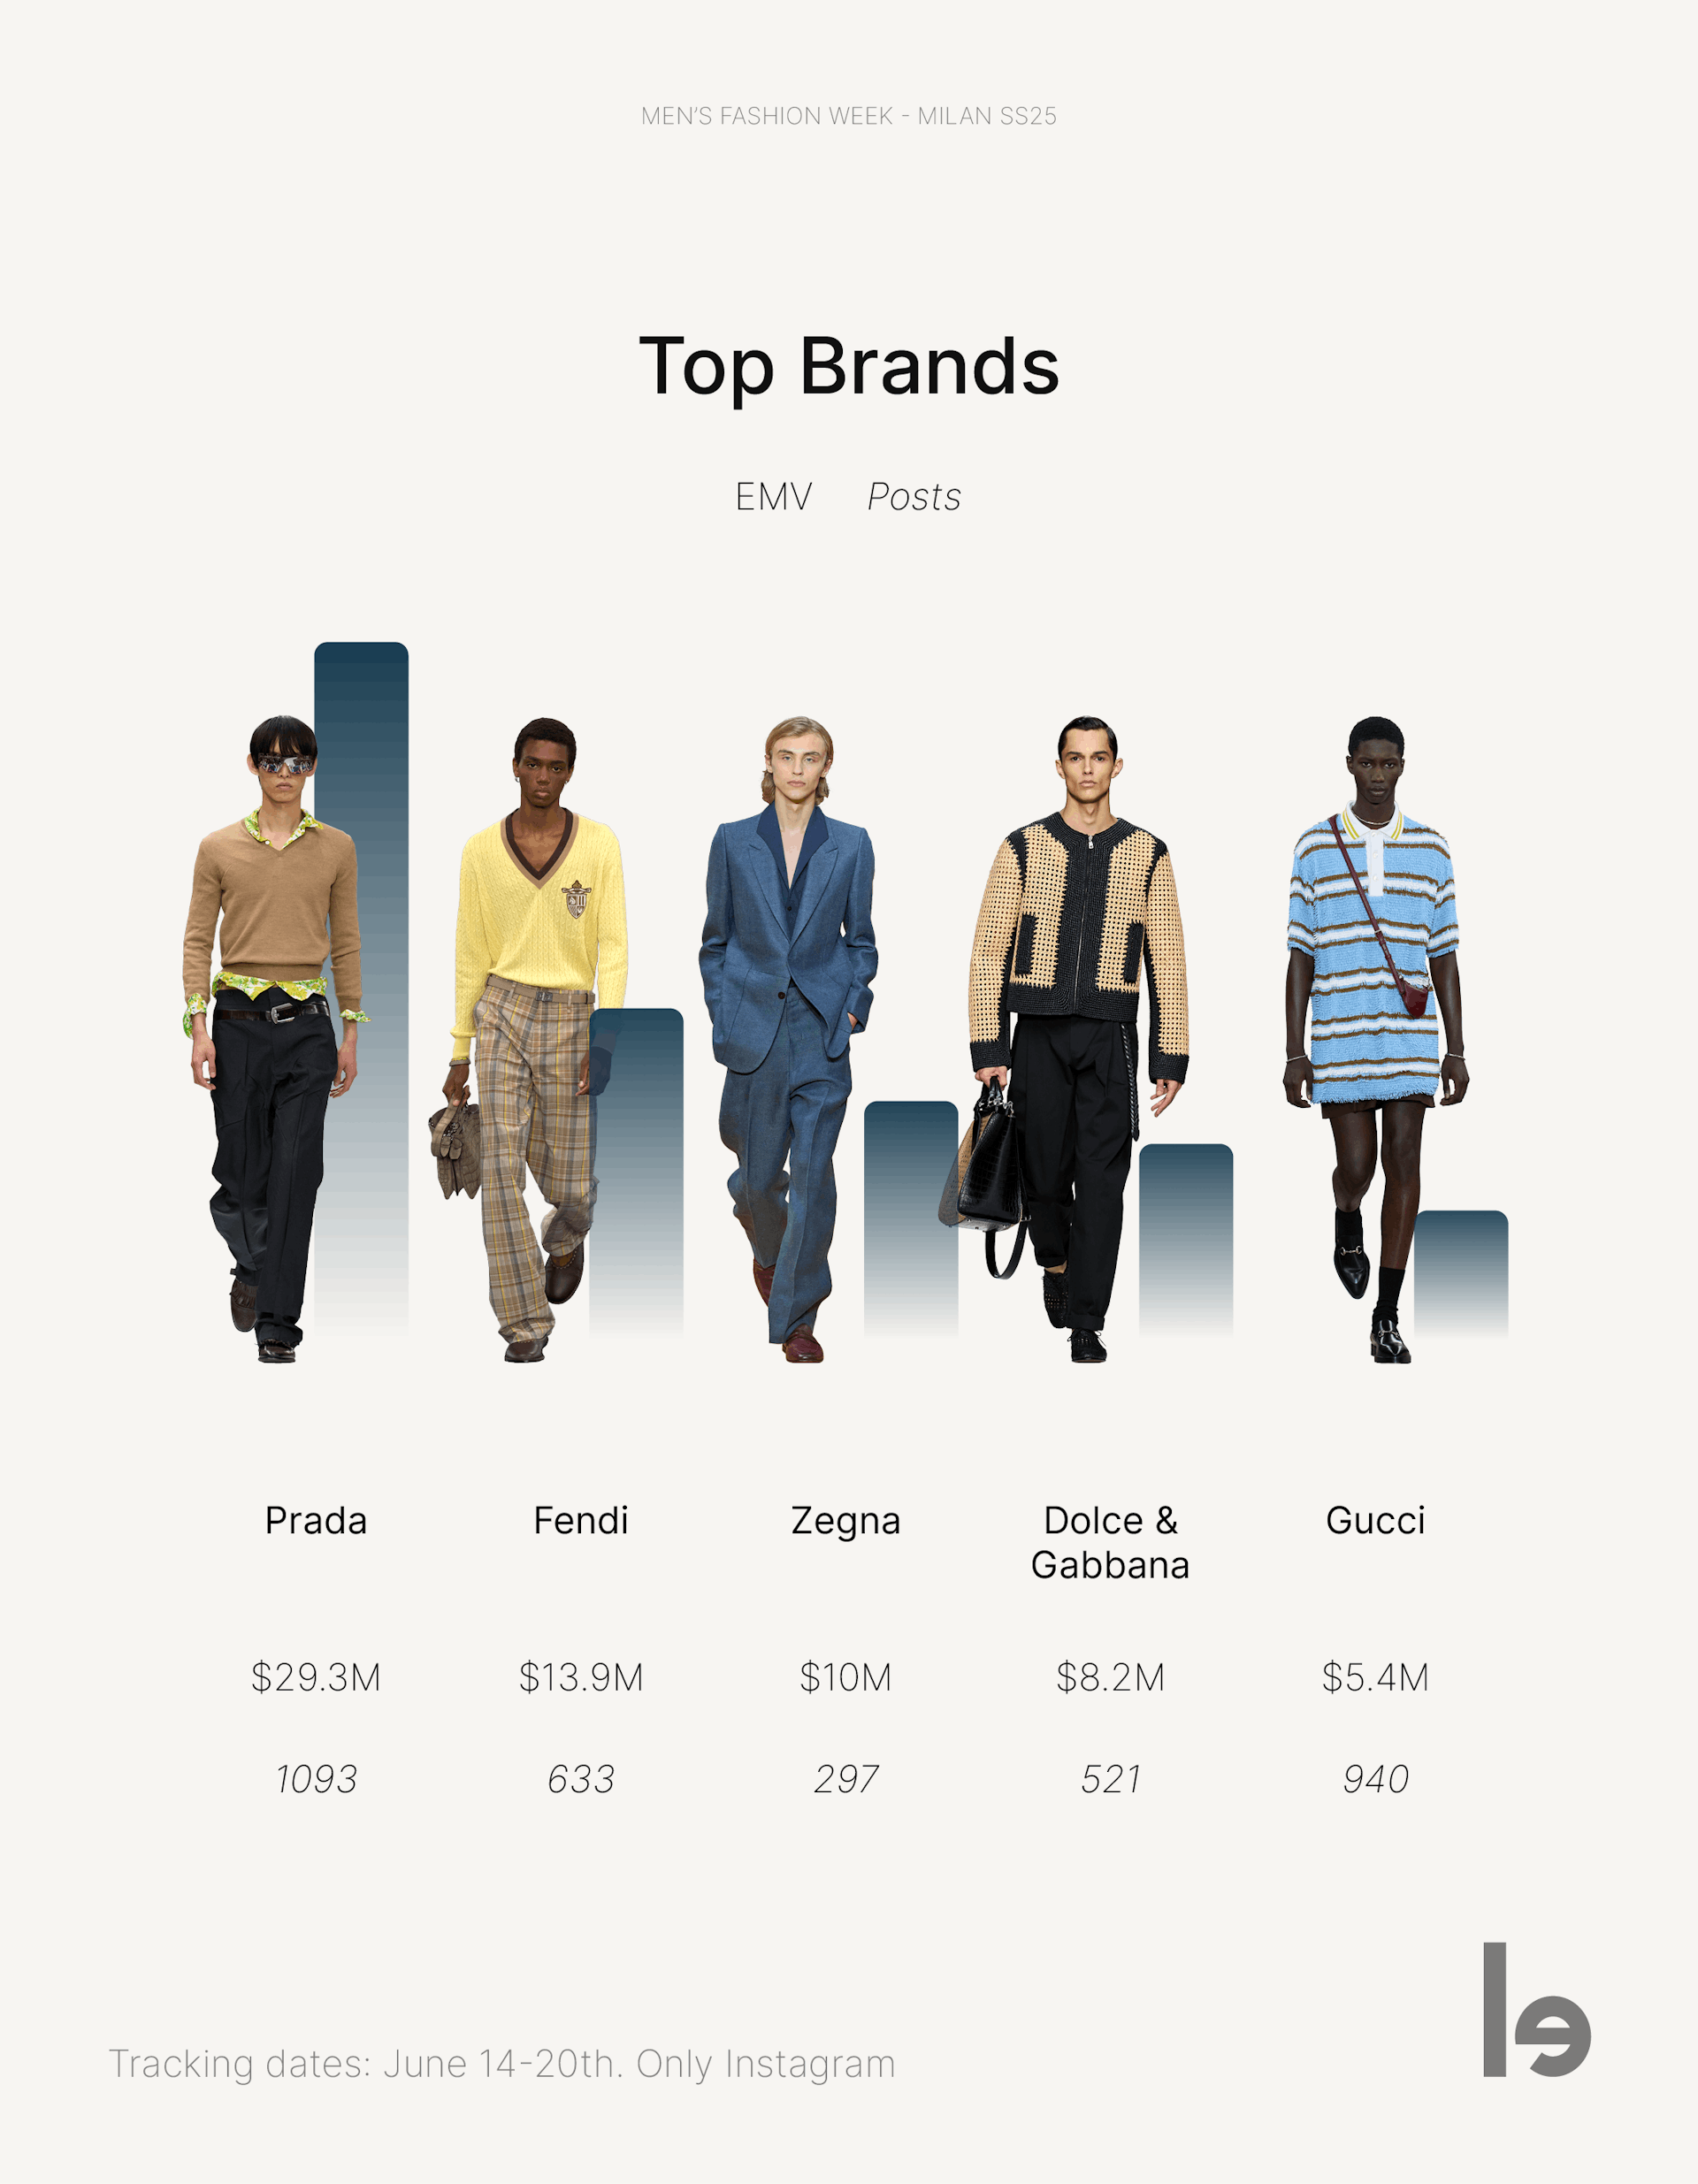 The top brands at MFW Menswear SS25.